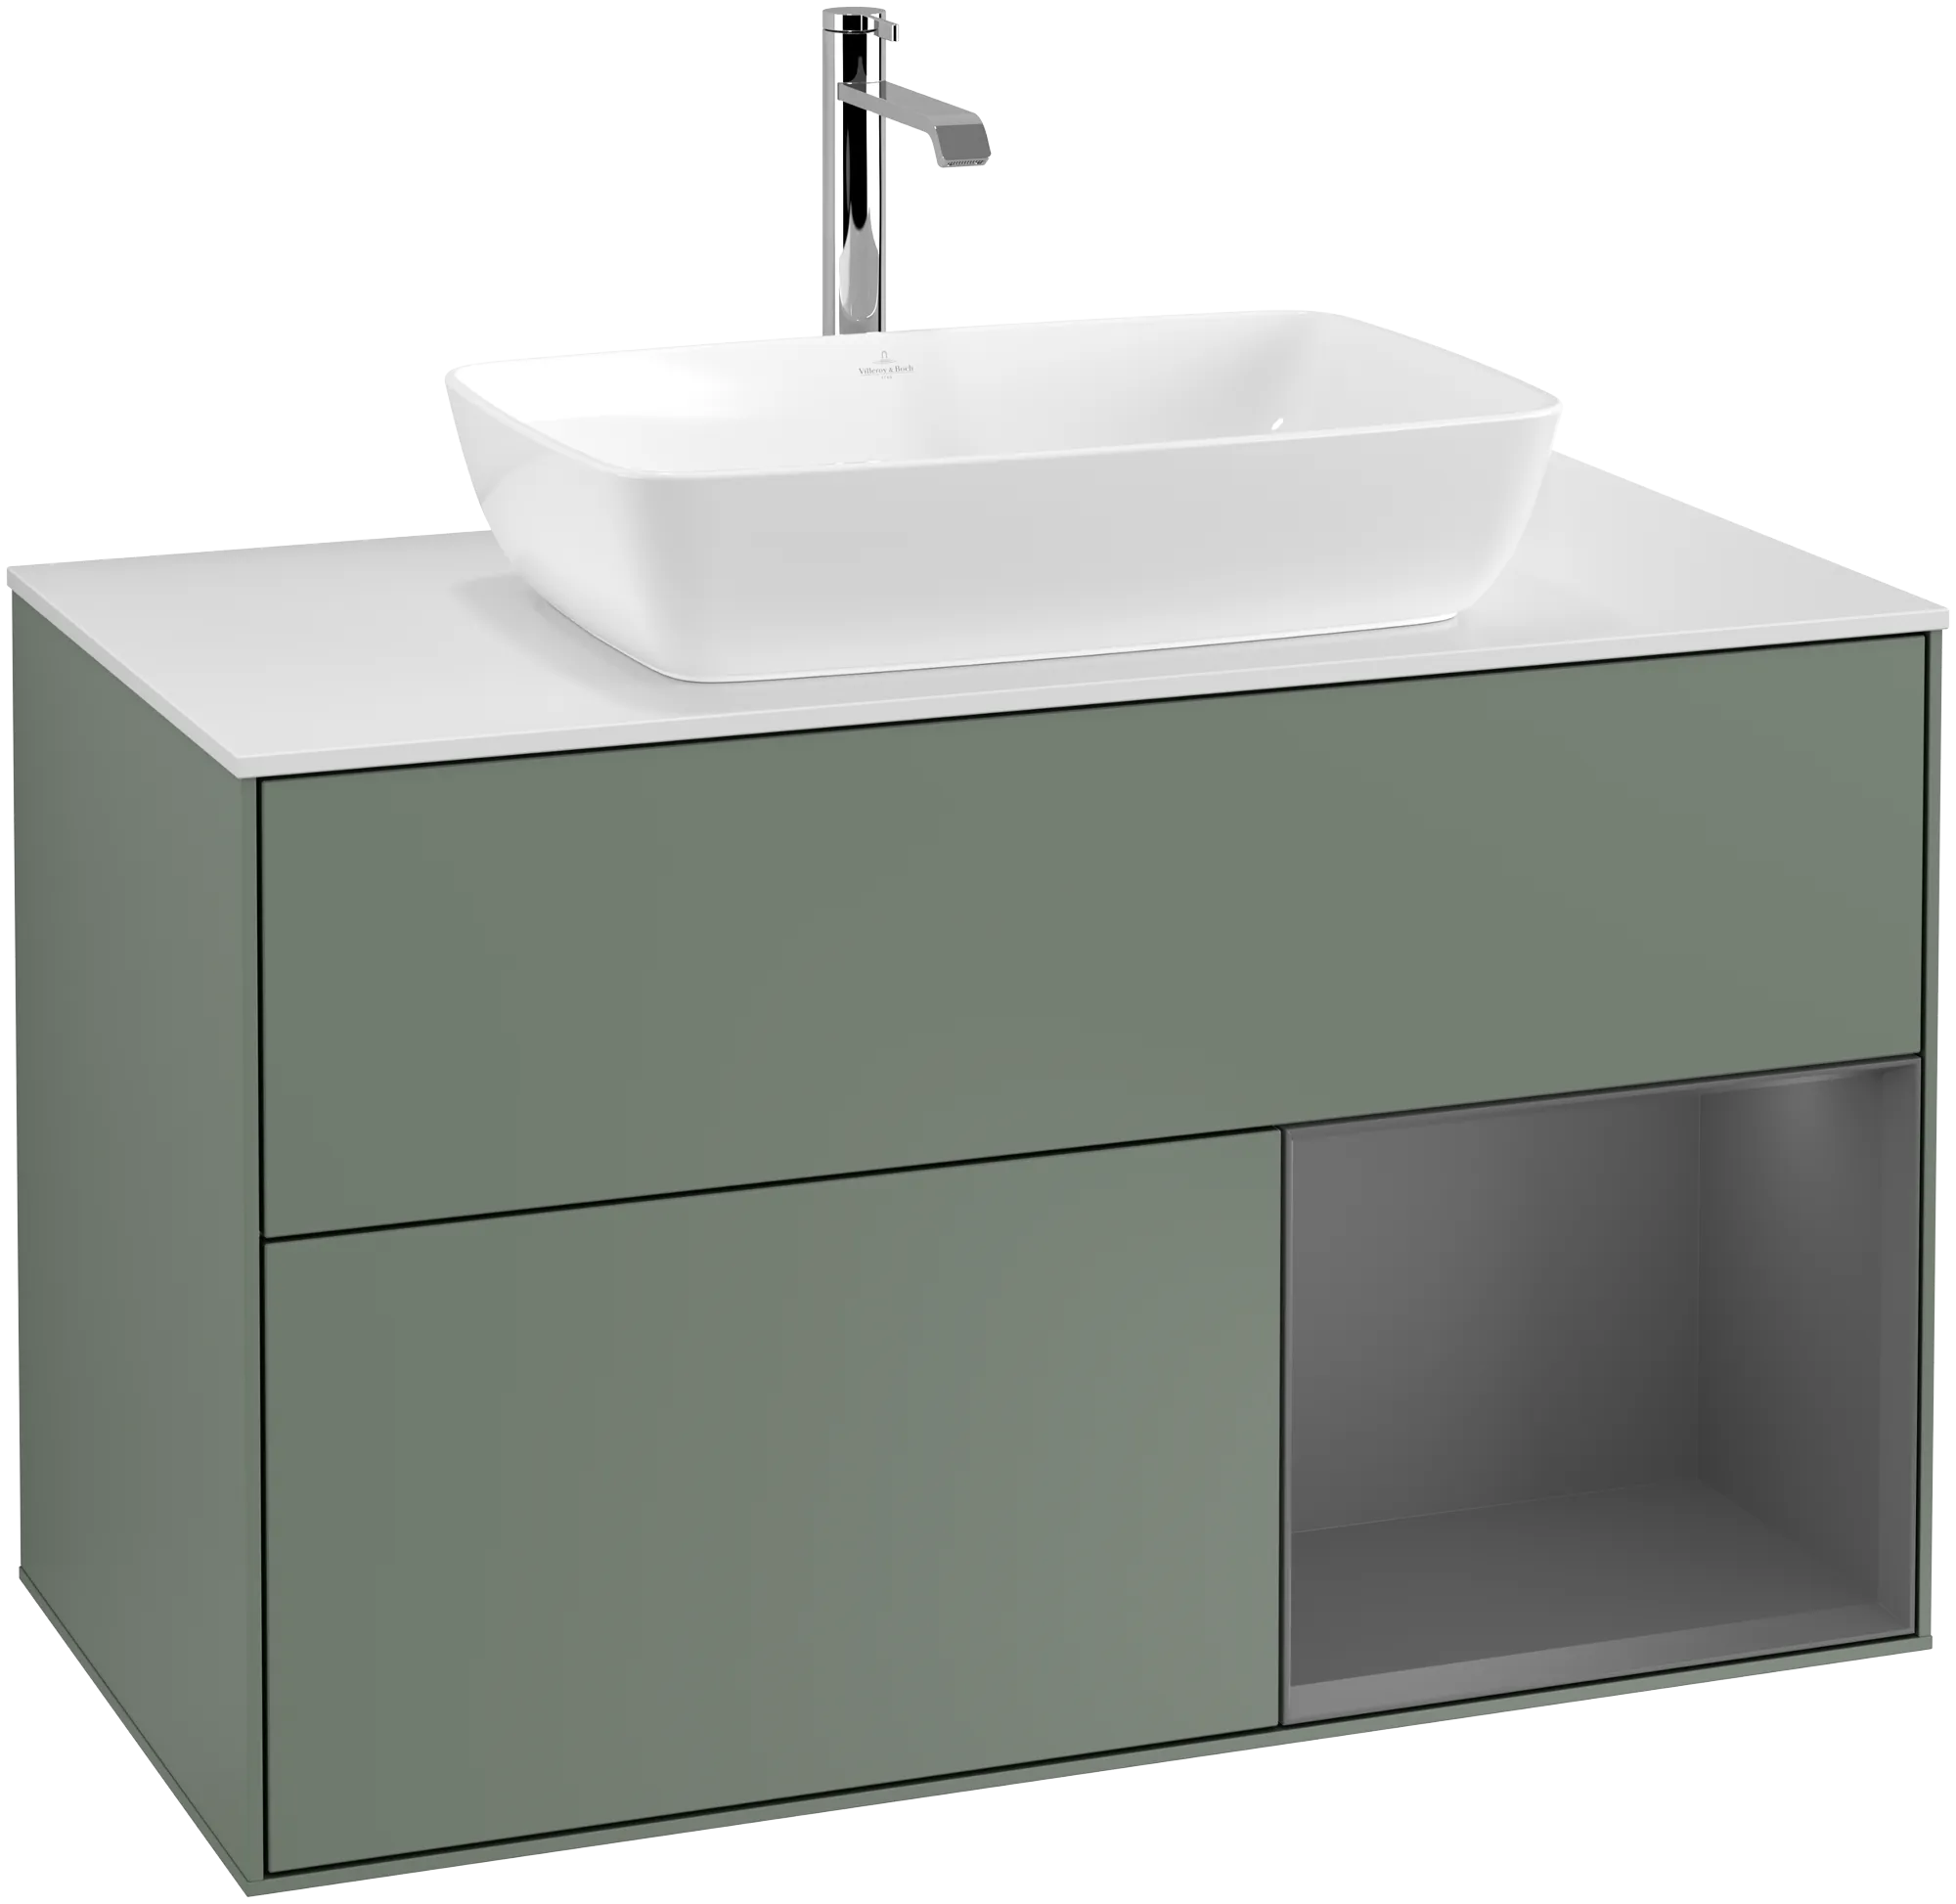 Picture of VILLEROY BOCH Finion Vanity unit, with lighting, 2 pull-out compartments, 1000 x 603 x 501 mm, Olive Matt Lacquer / Anthracite Matt Lacquer / Glass White Matt #G781GKGM